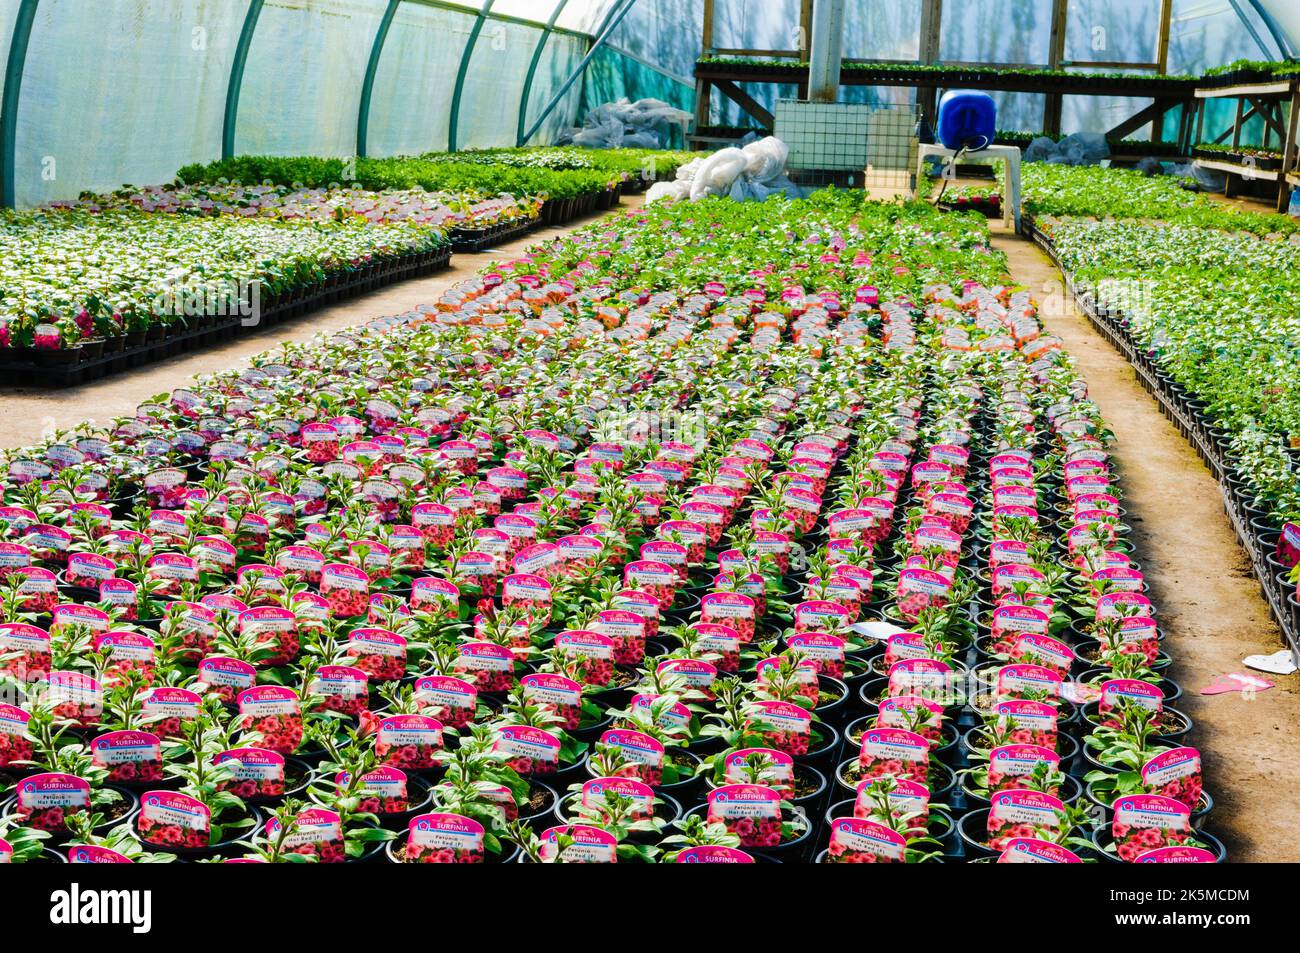 Polytunnel at a nursery with lots of young bedding plants, including Surfina petunias Stock Photo